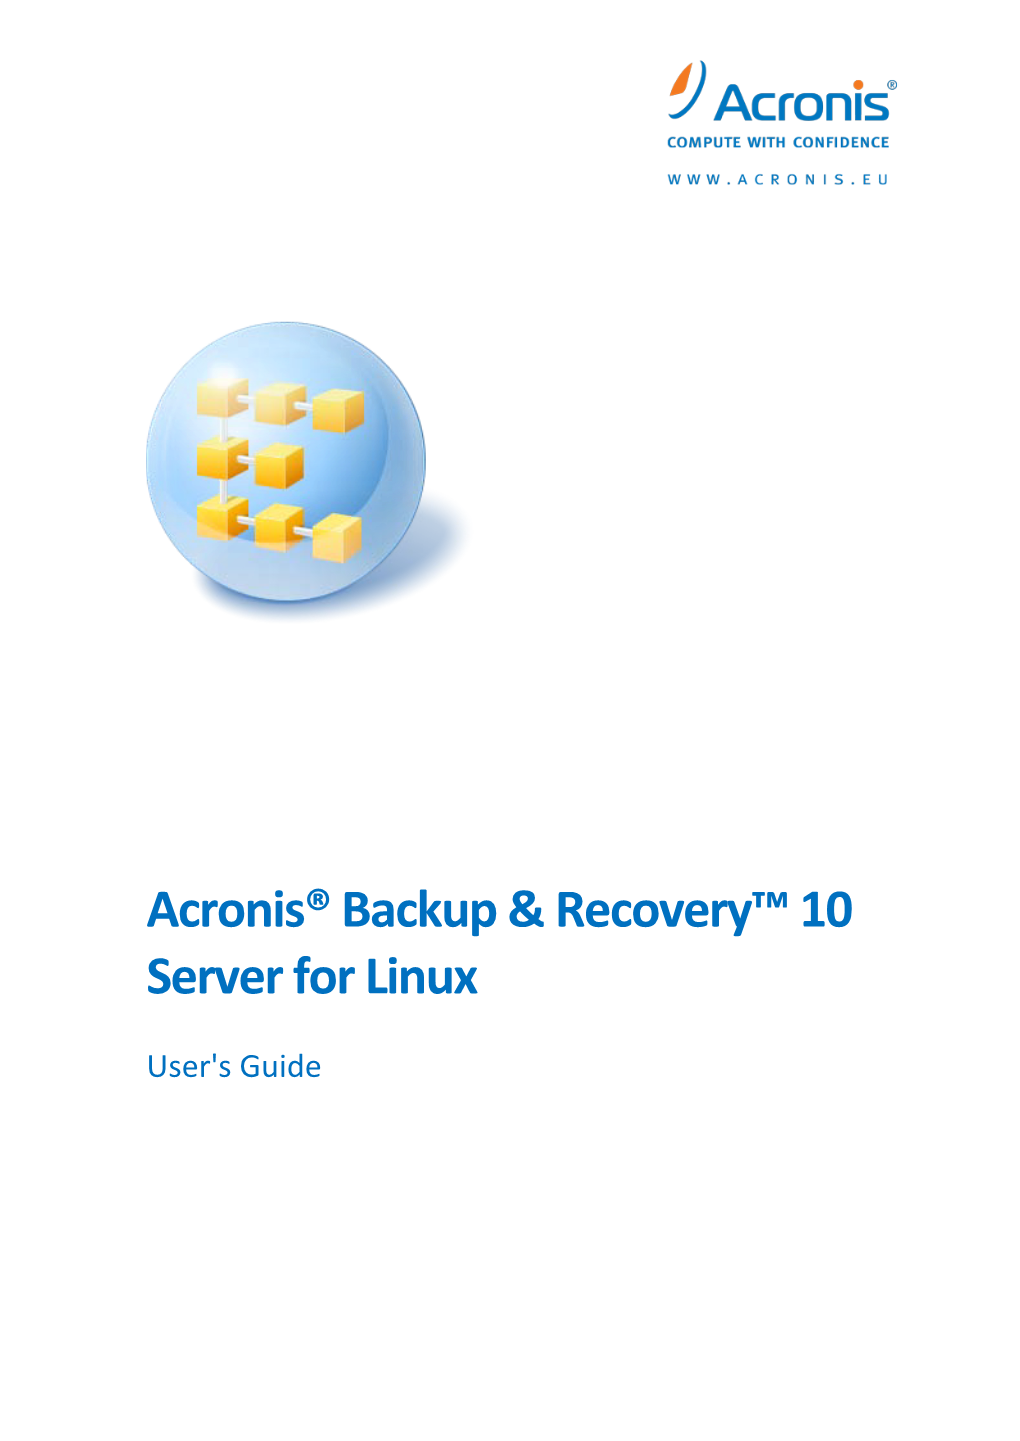 Acronis® Backup & Recovery ™ 10 Server for Linux